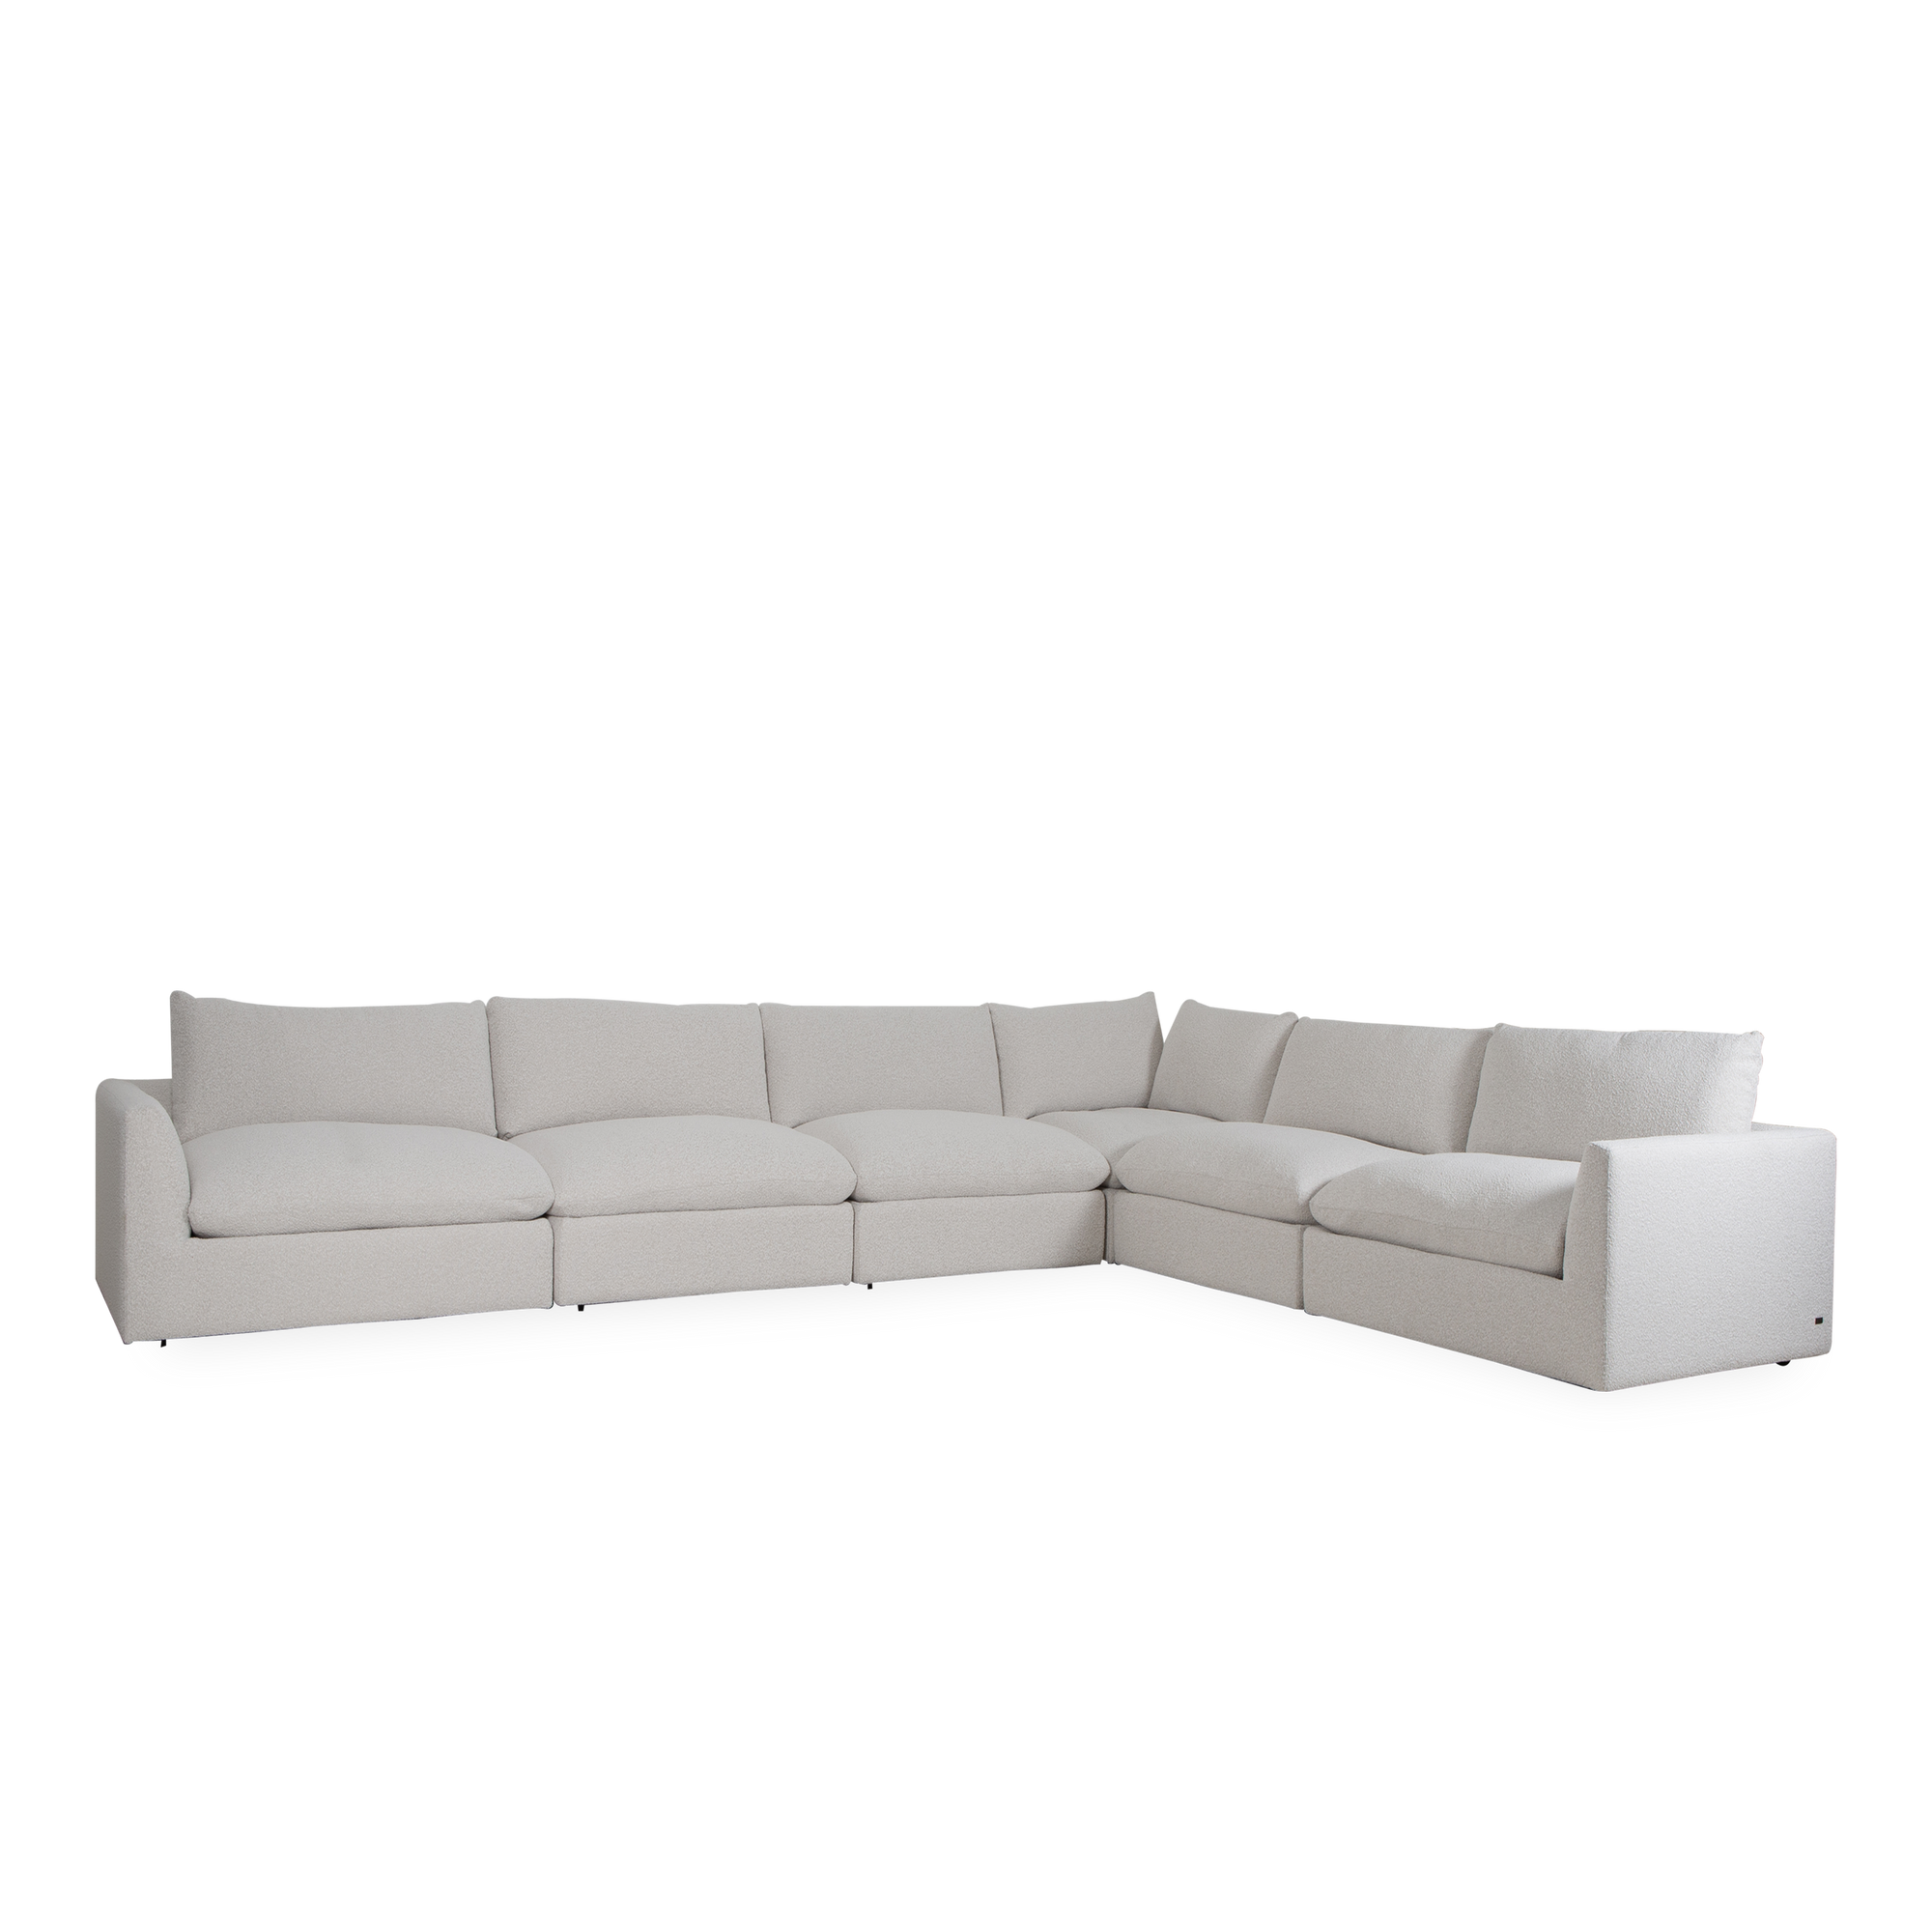 Elegant and ultra-versatile, the Espen Modular Sectional cocoons you in plush comfort.